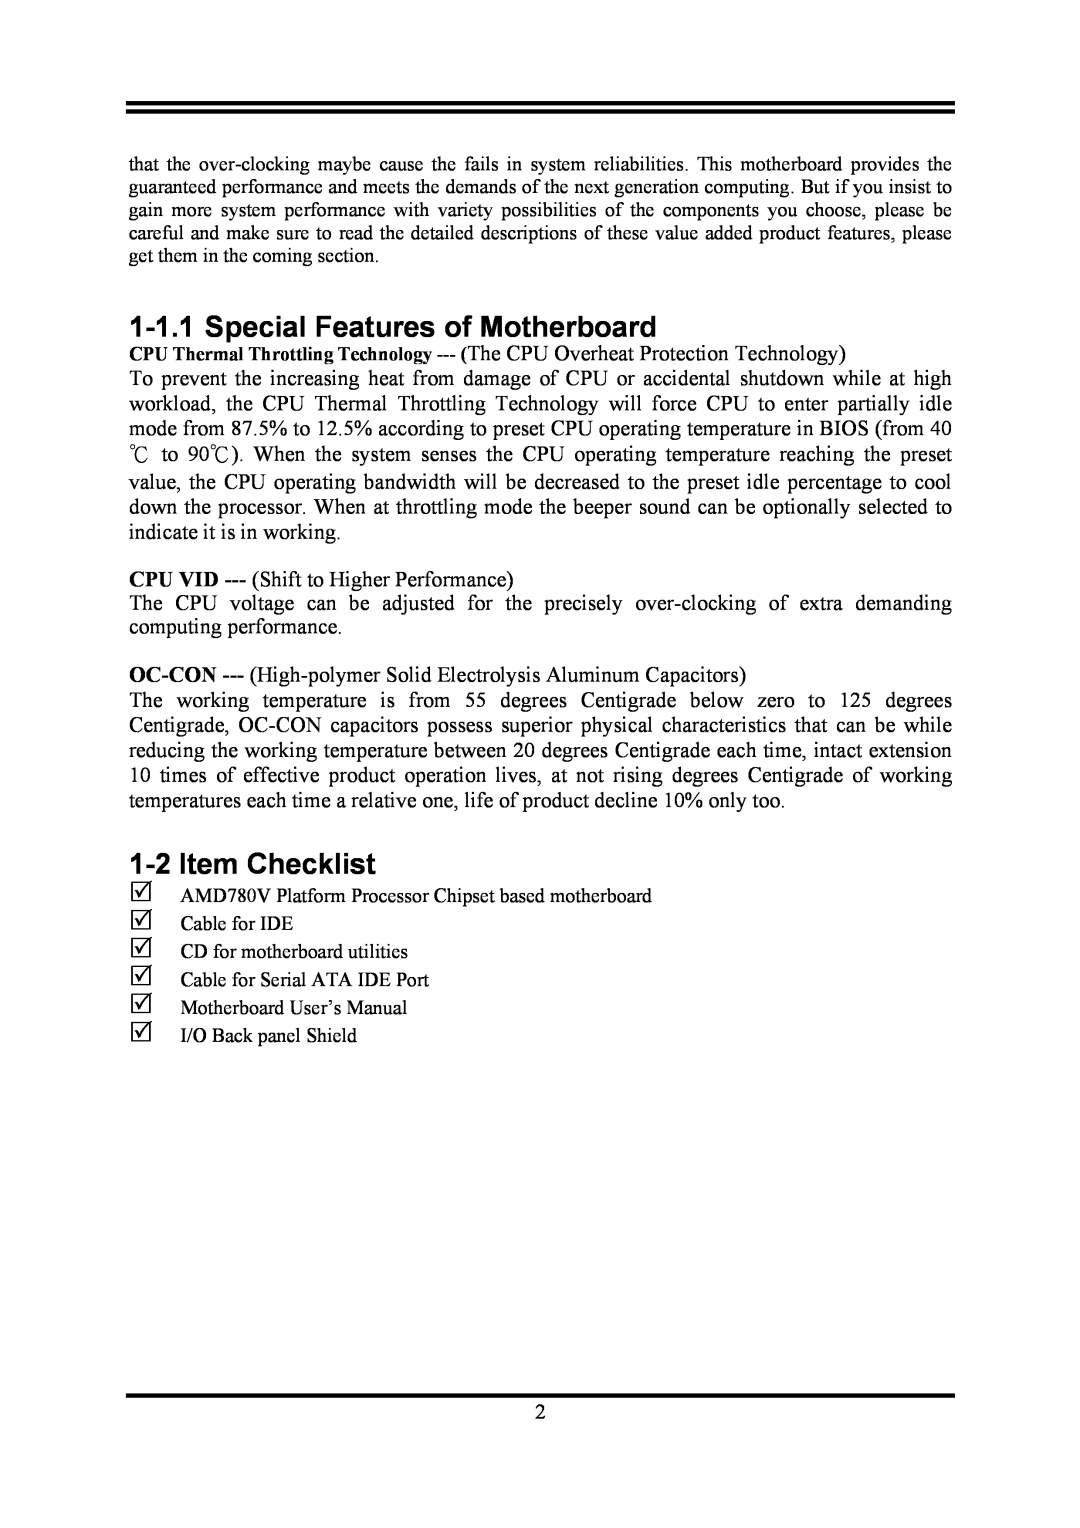 AMD KM780V user manual Special Features of Motherboard, Item Checklist 